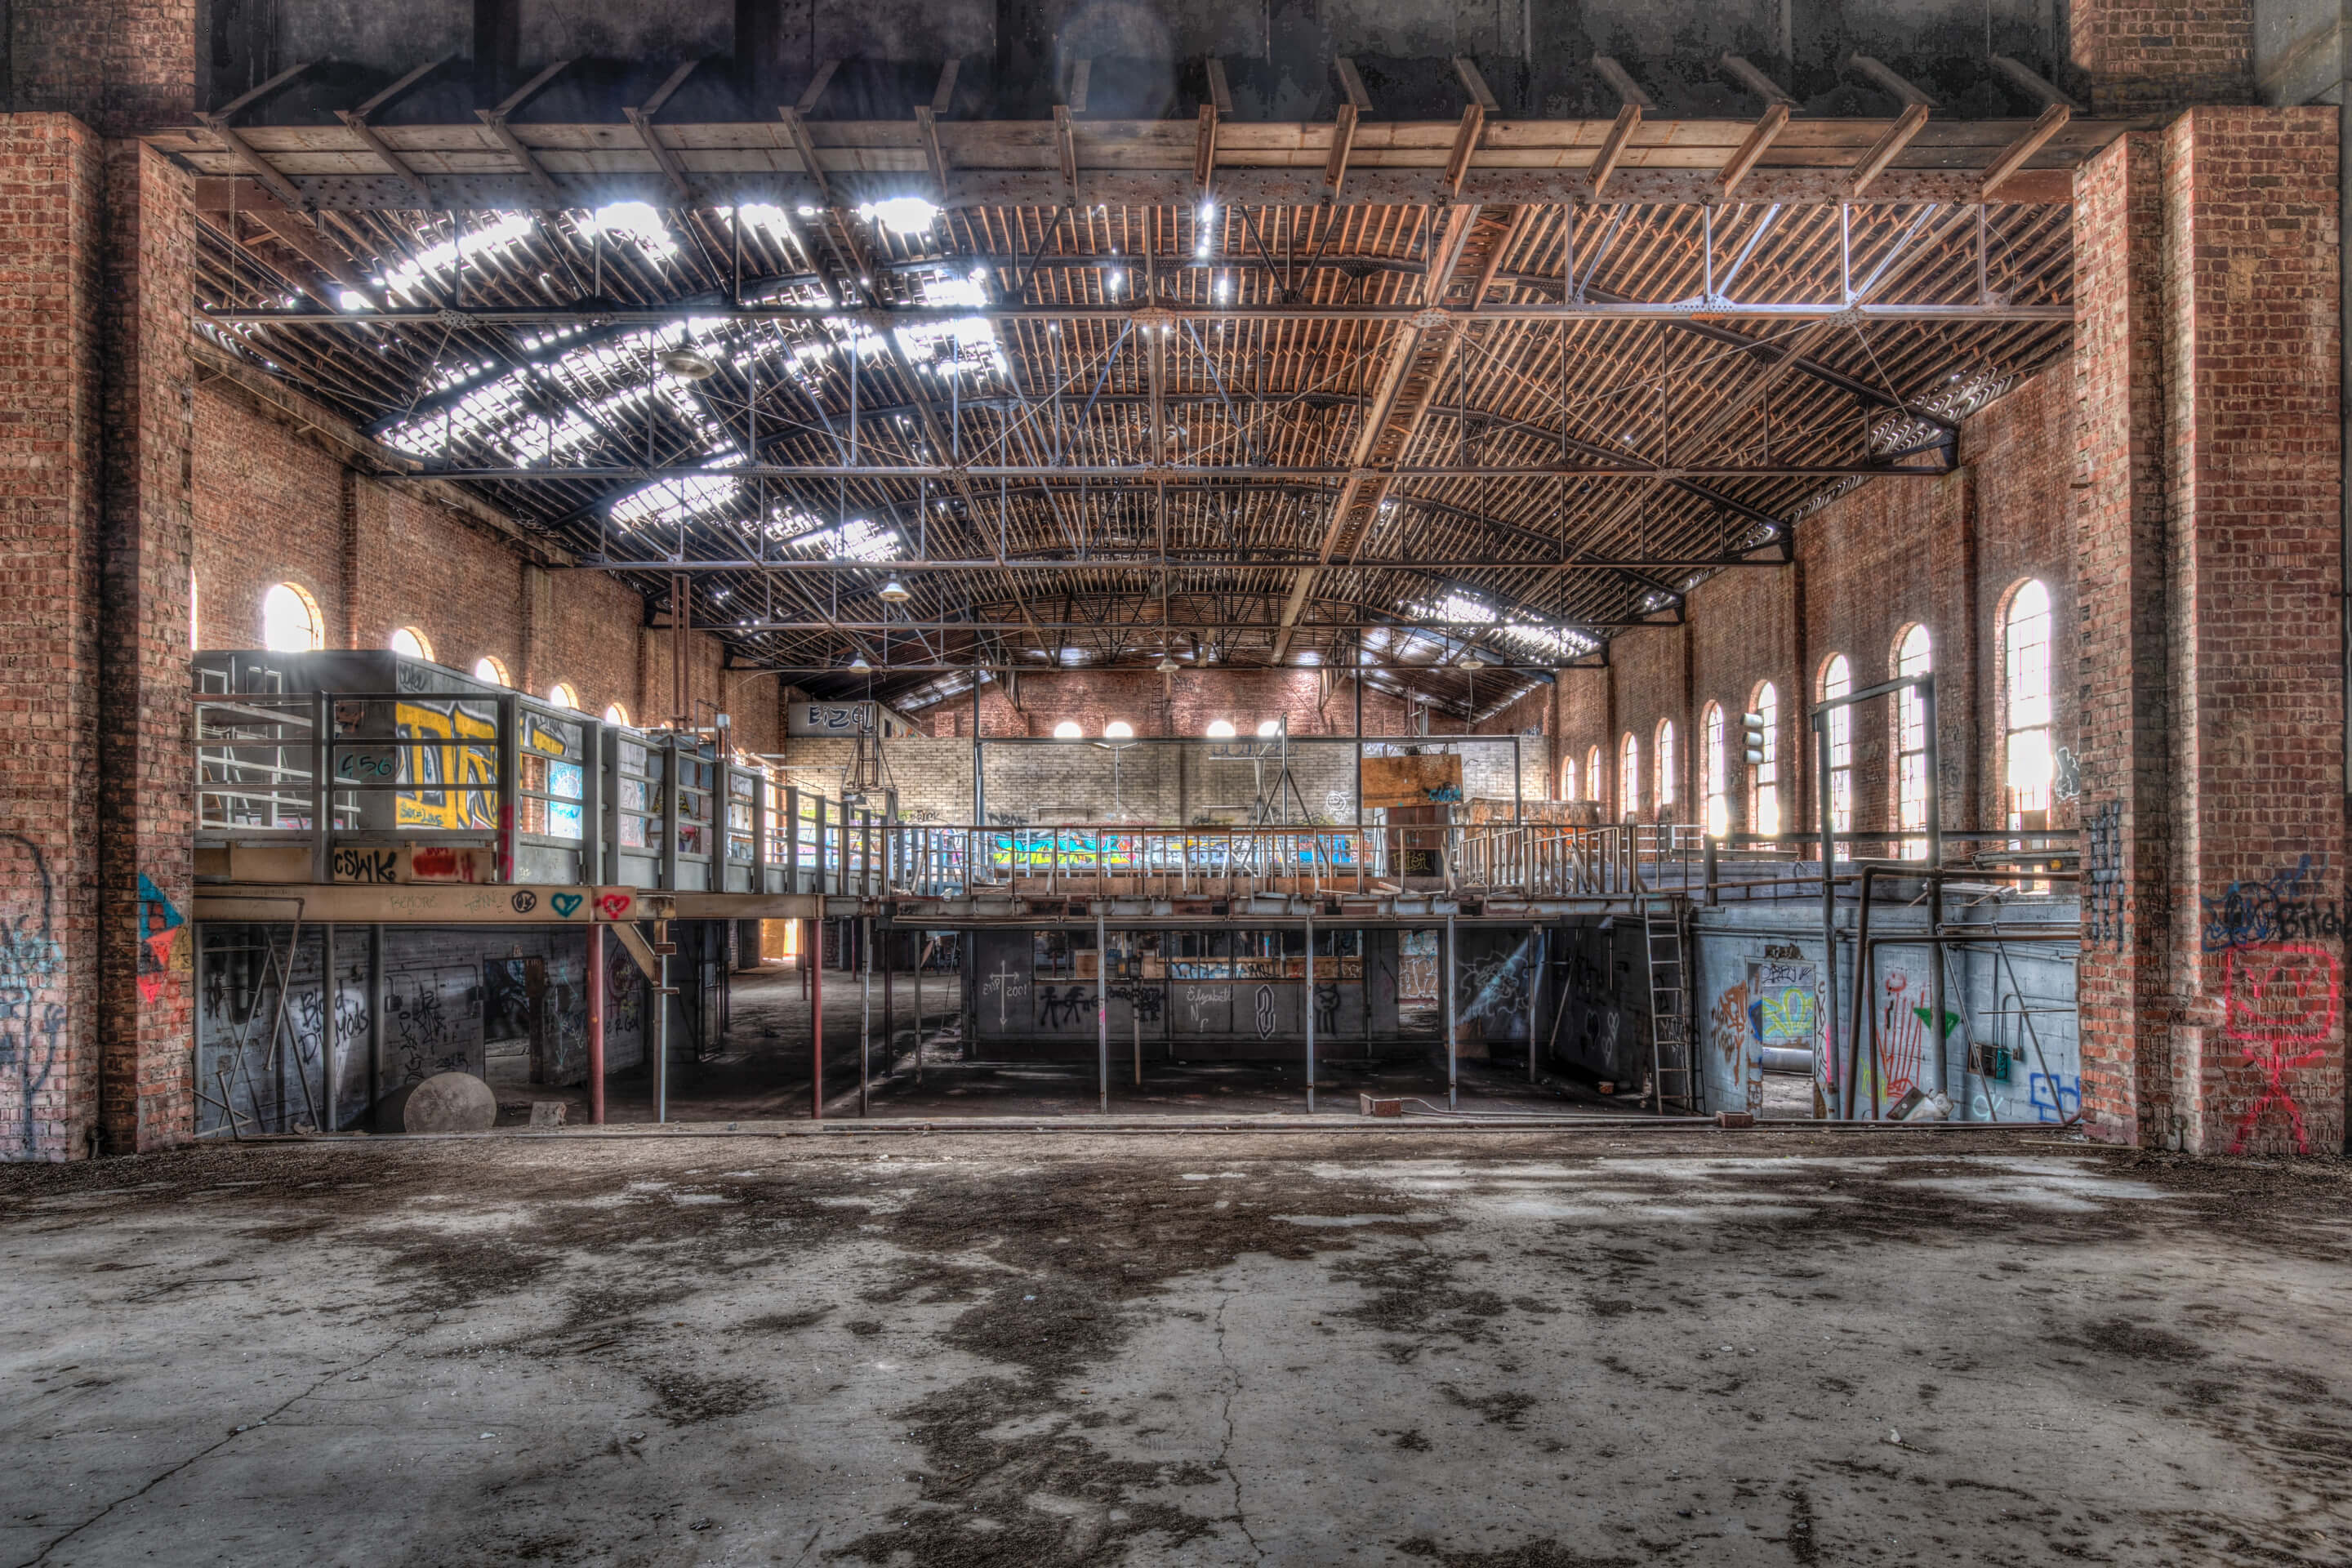 interior view of an abandoned warehouse space